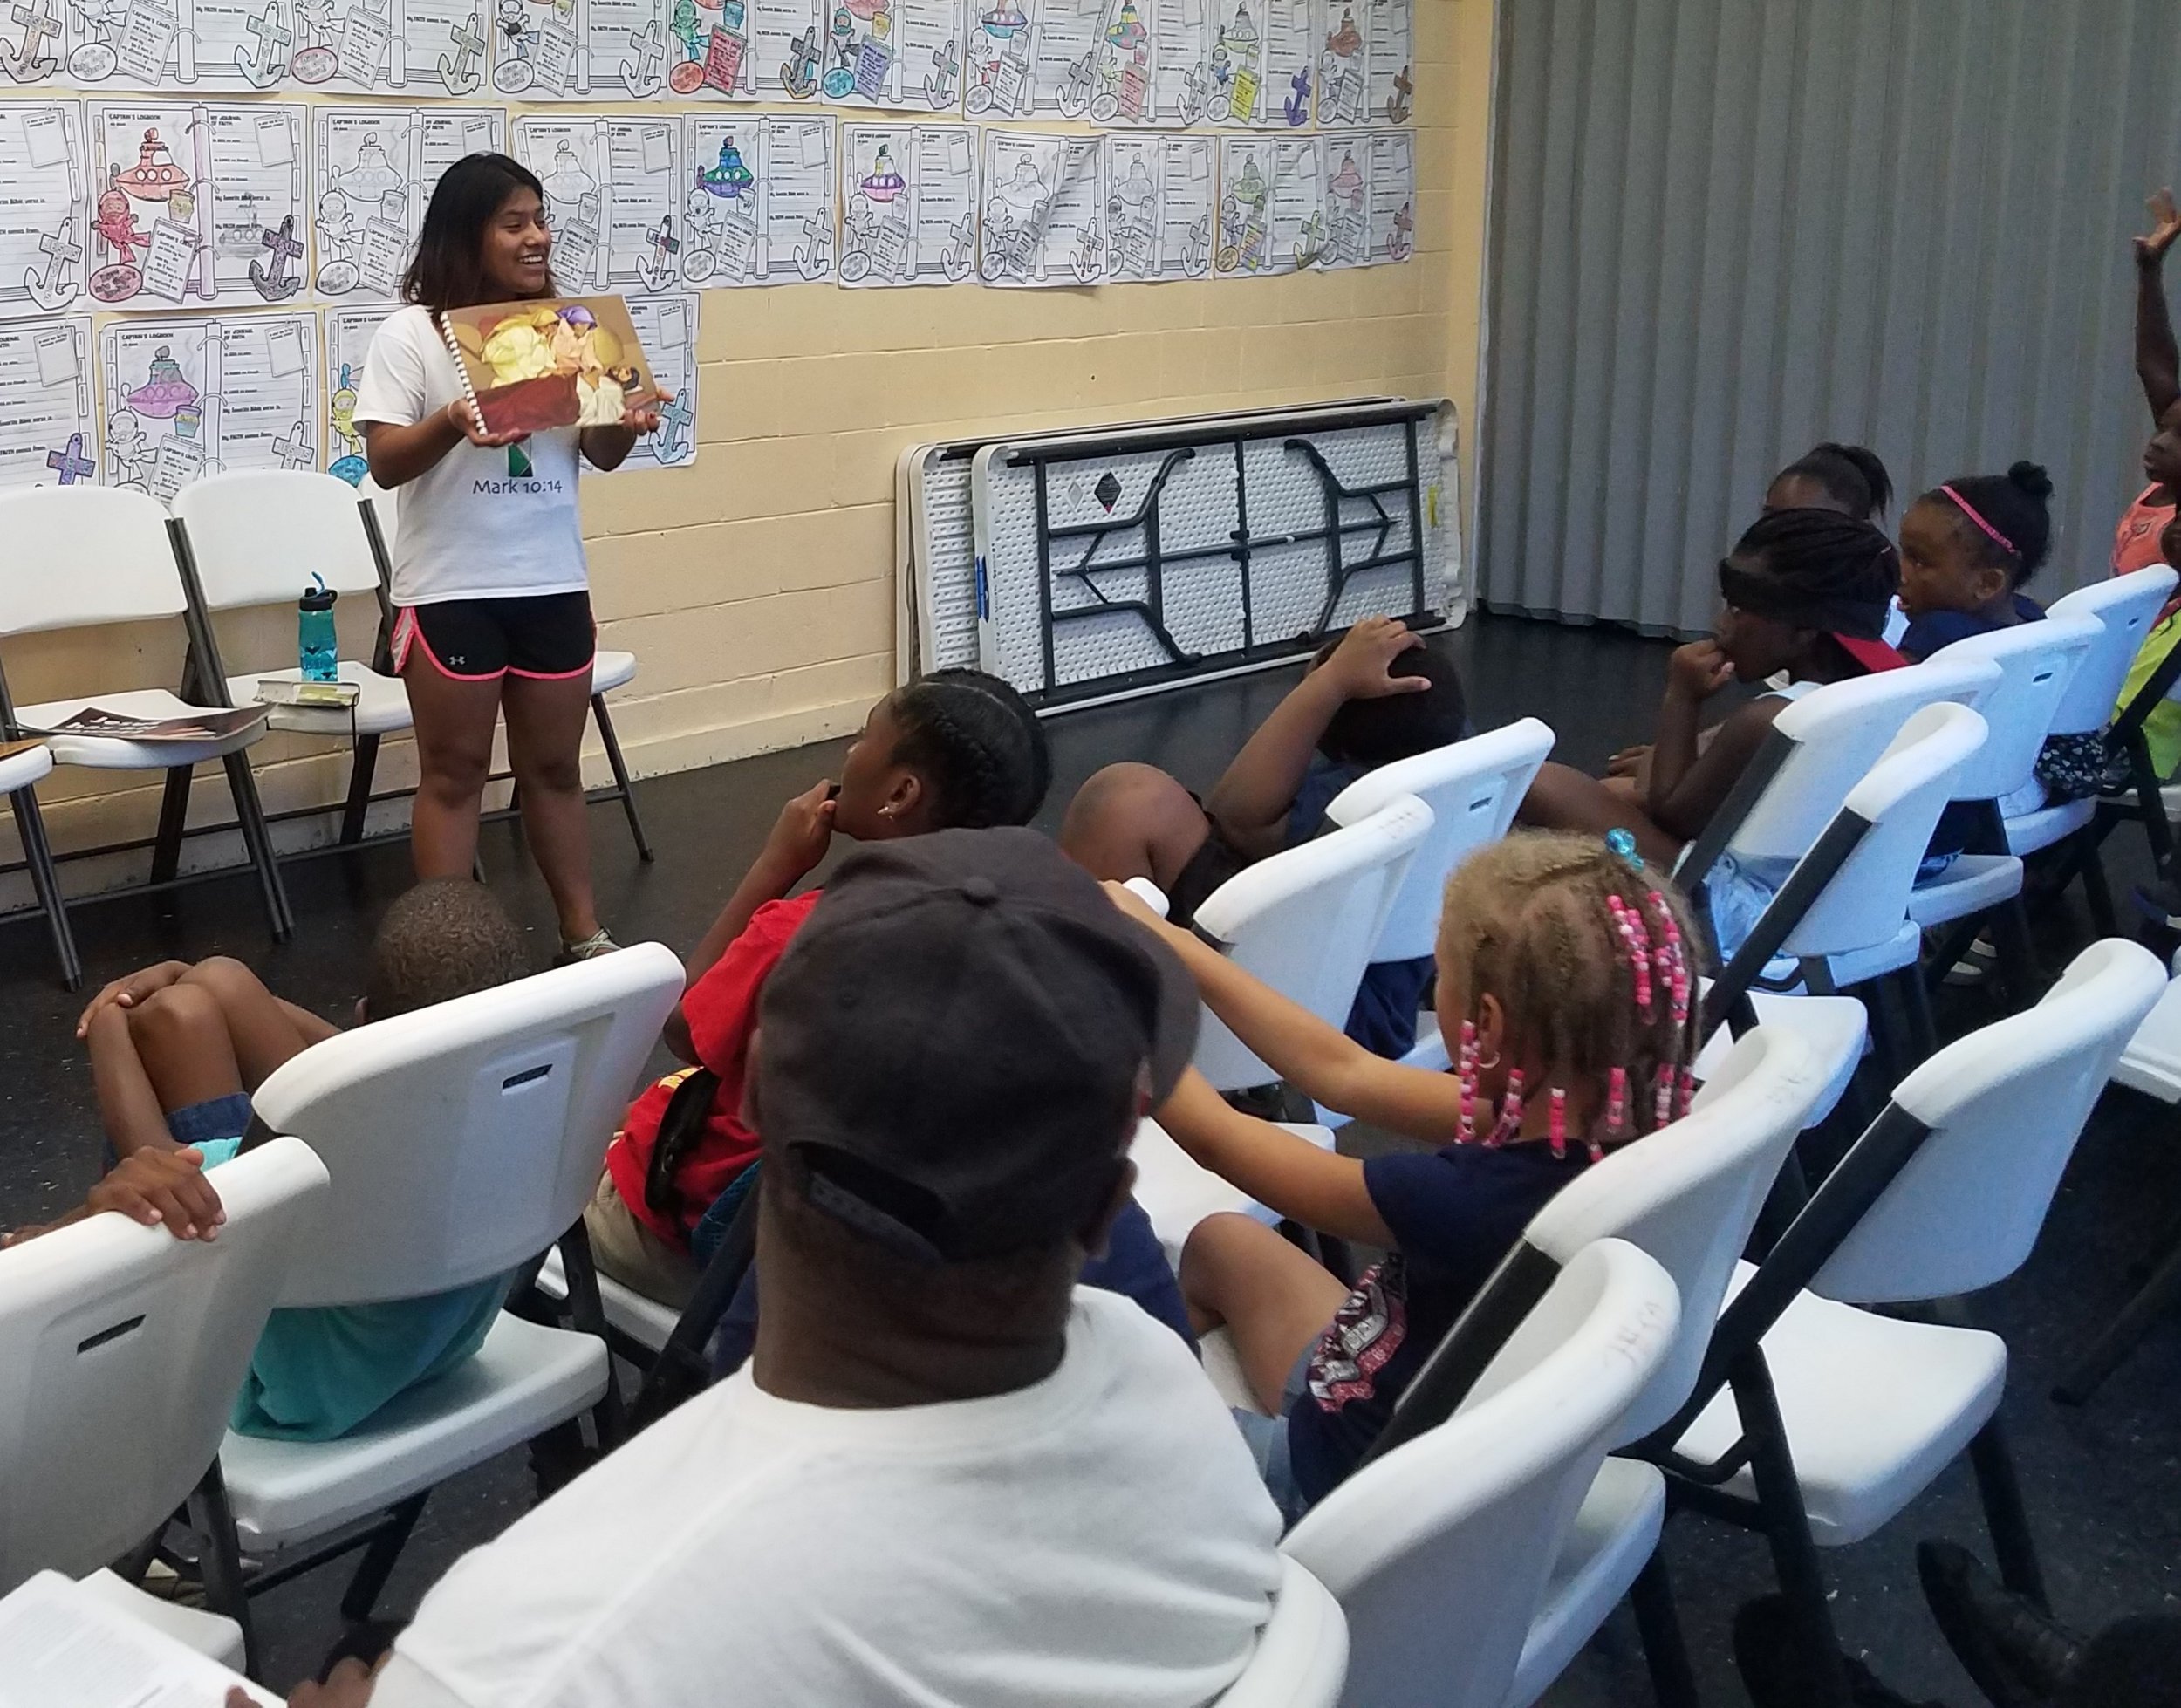  Marisol Luna teaches the Bible lesson of Jesus healing the official’s son in  5-Day Club®  at the Union Spring Community Center.  